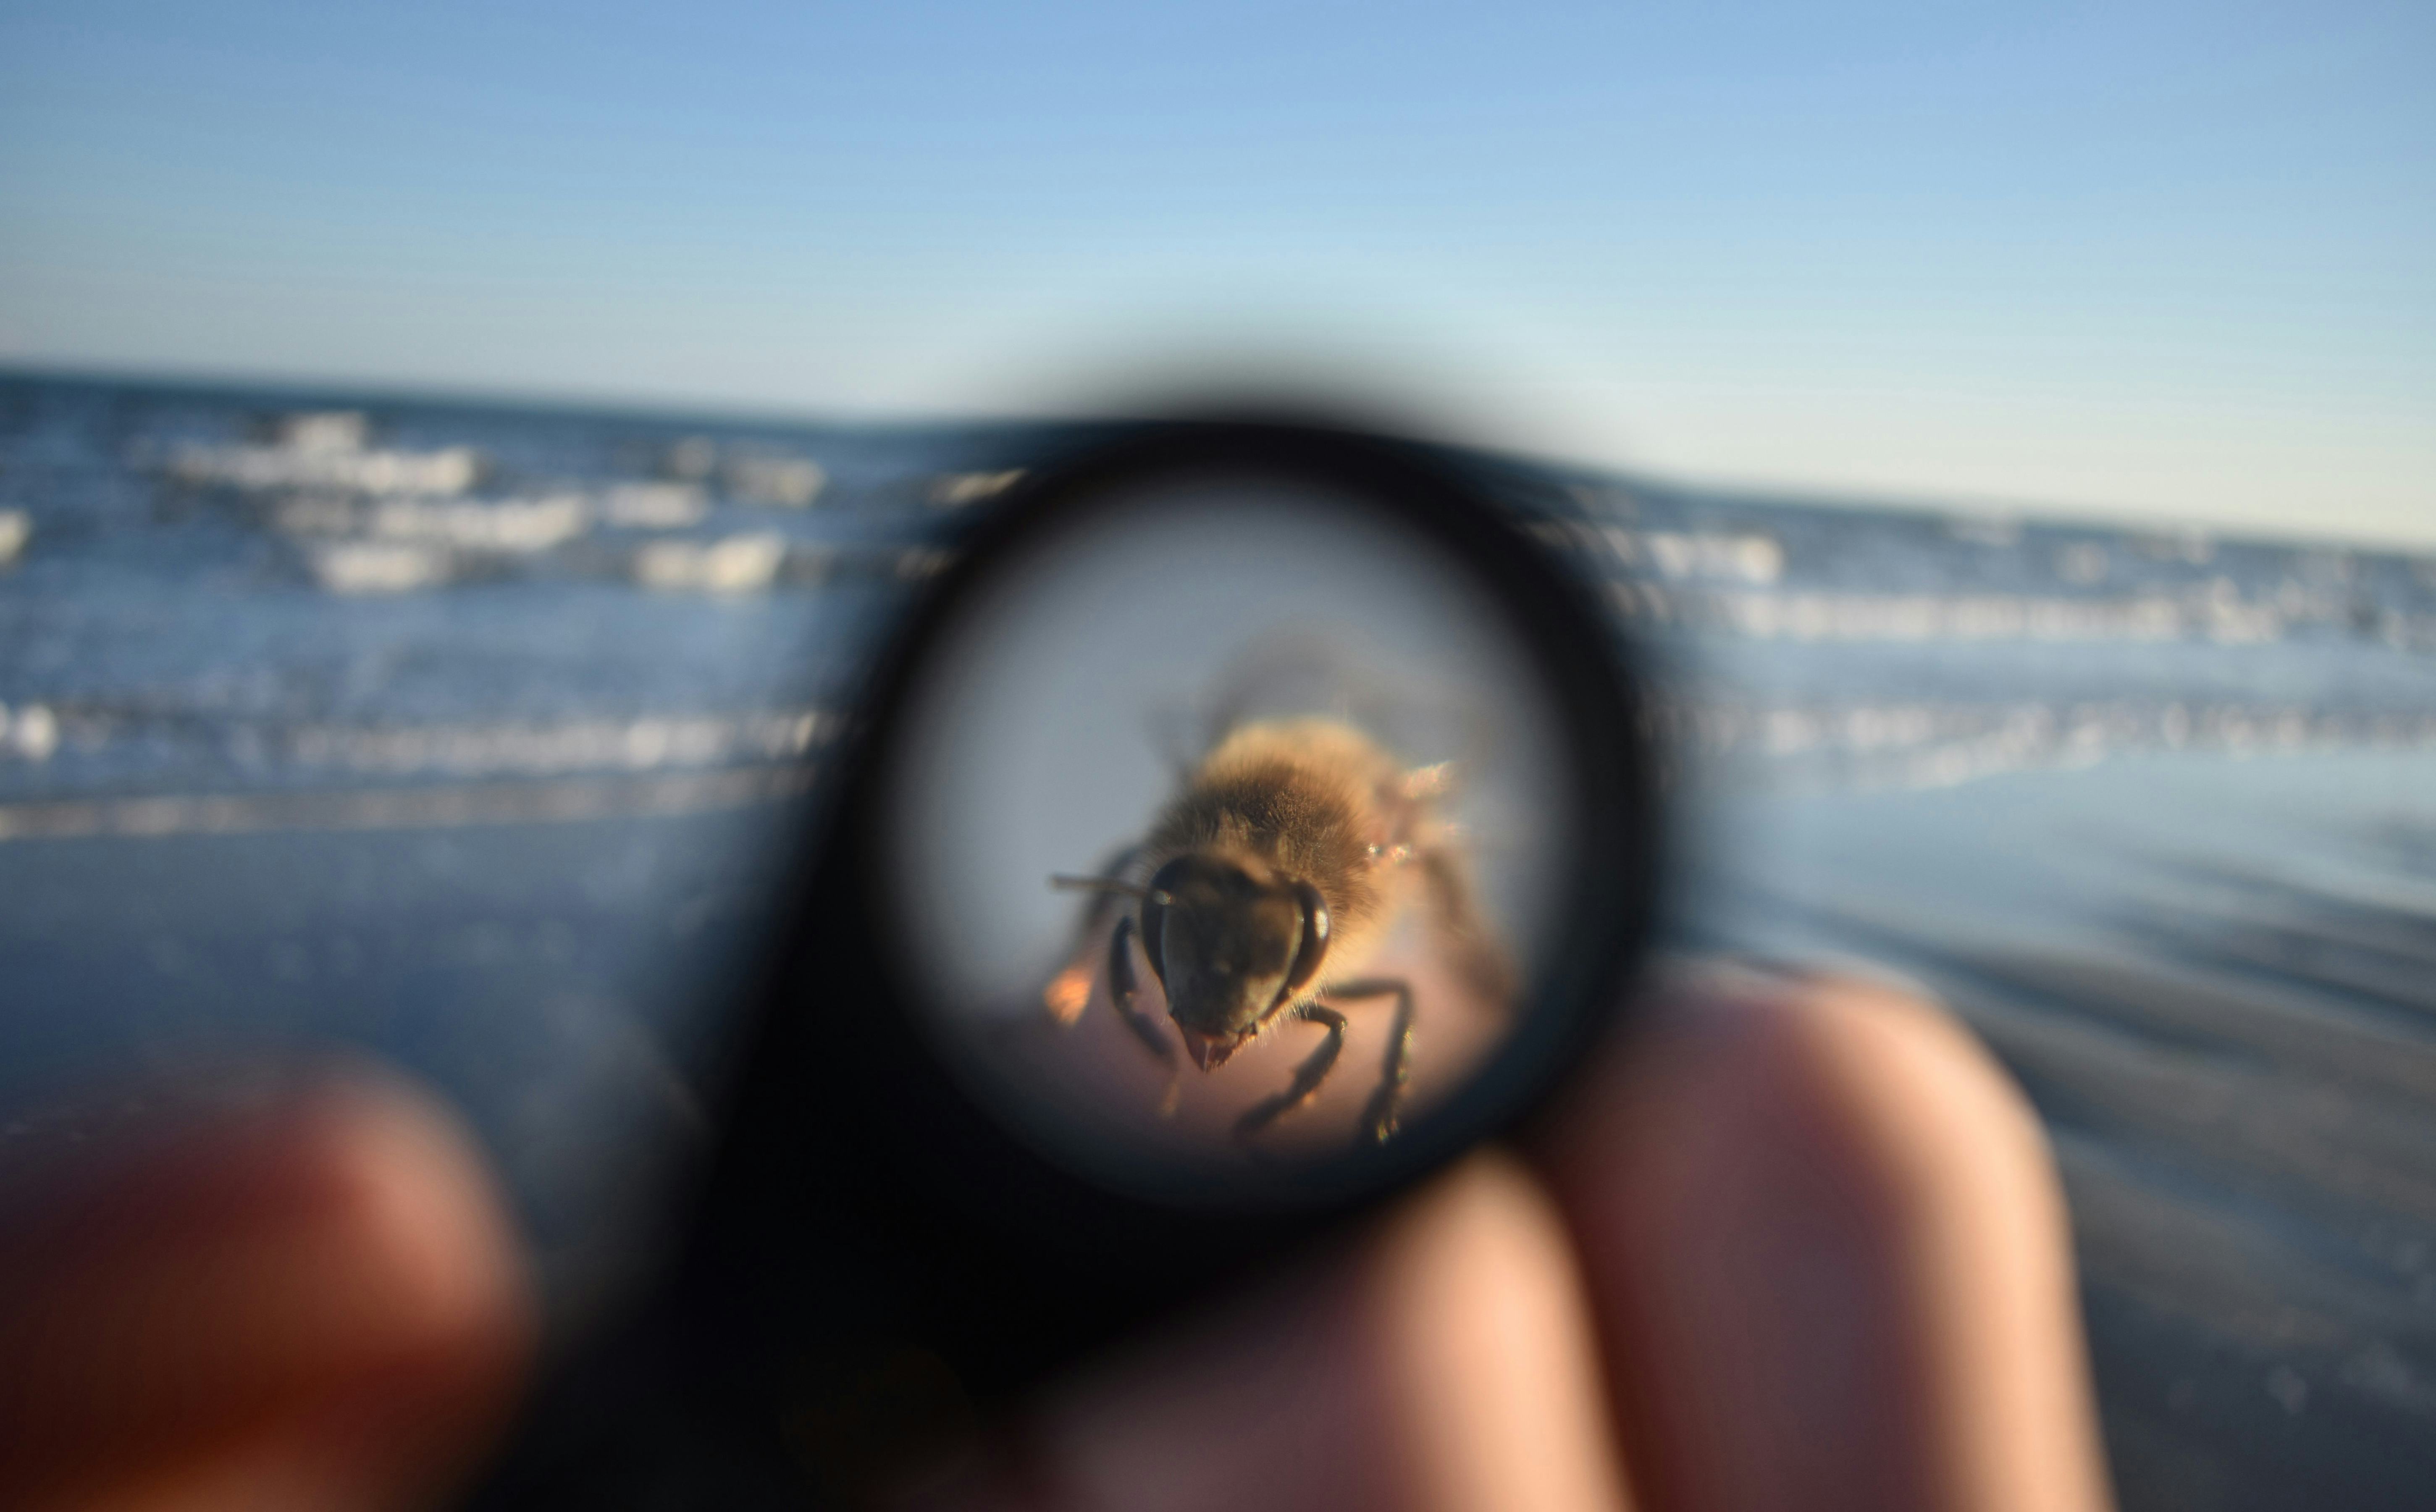 A honeybee that landed on a student's hand as seen through a handlens.